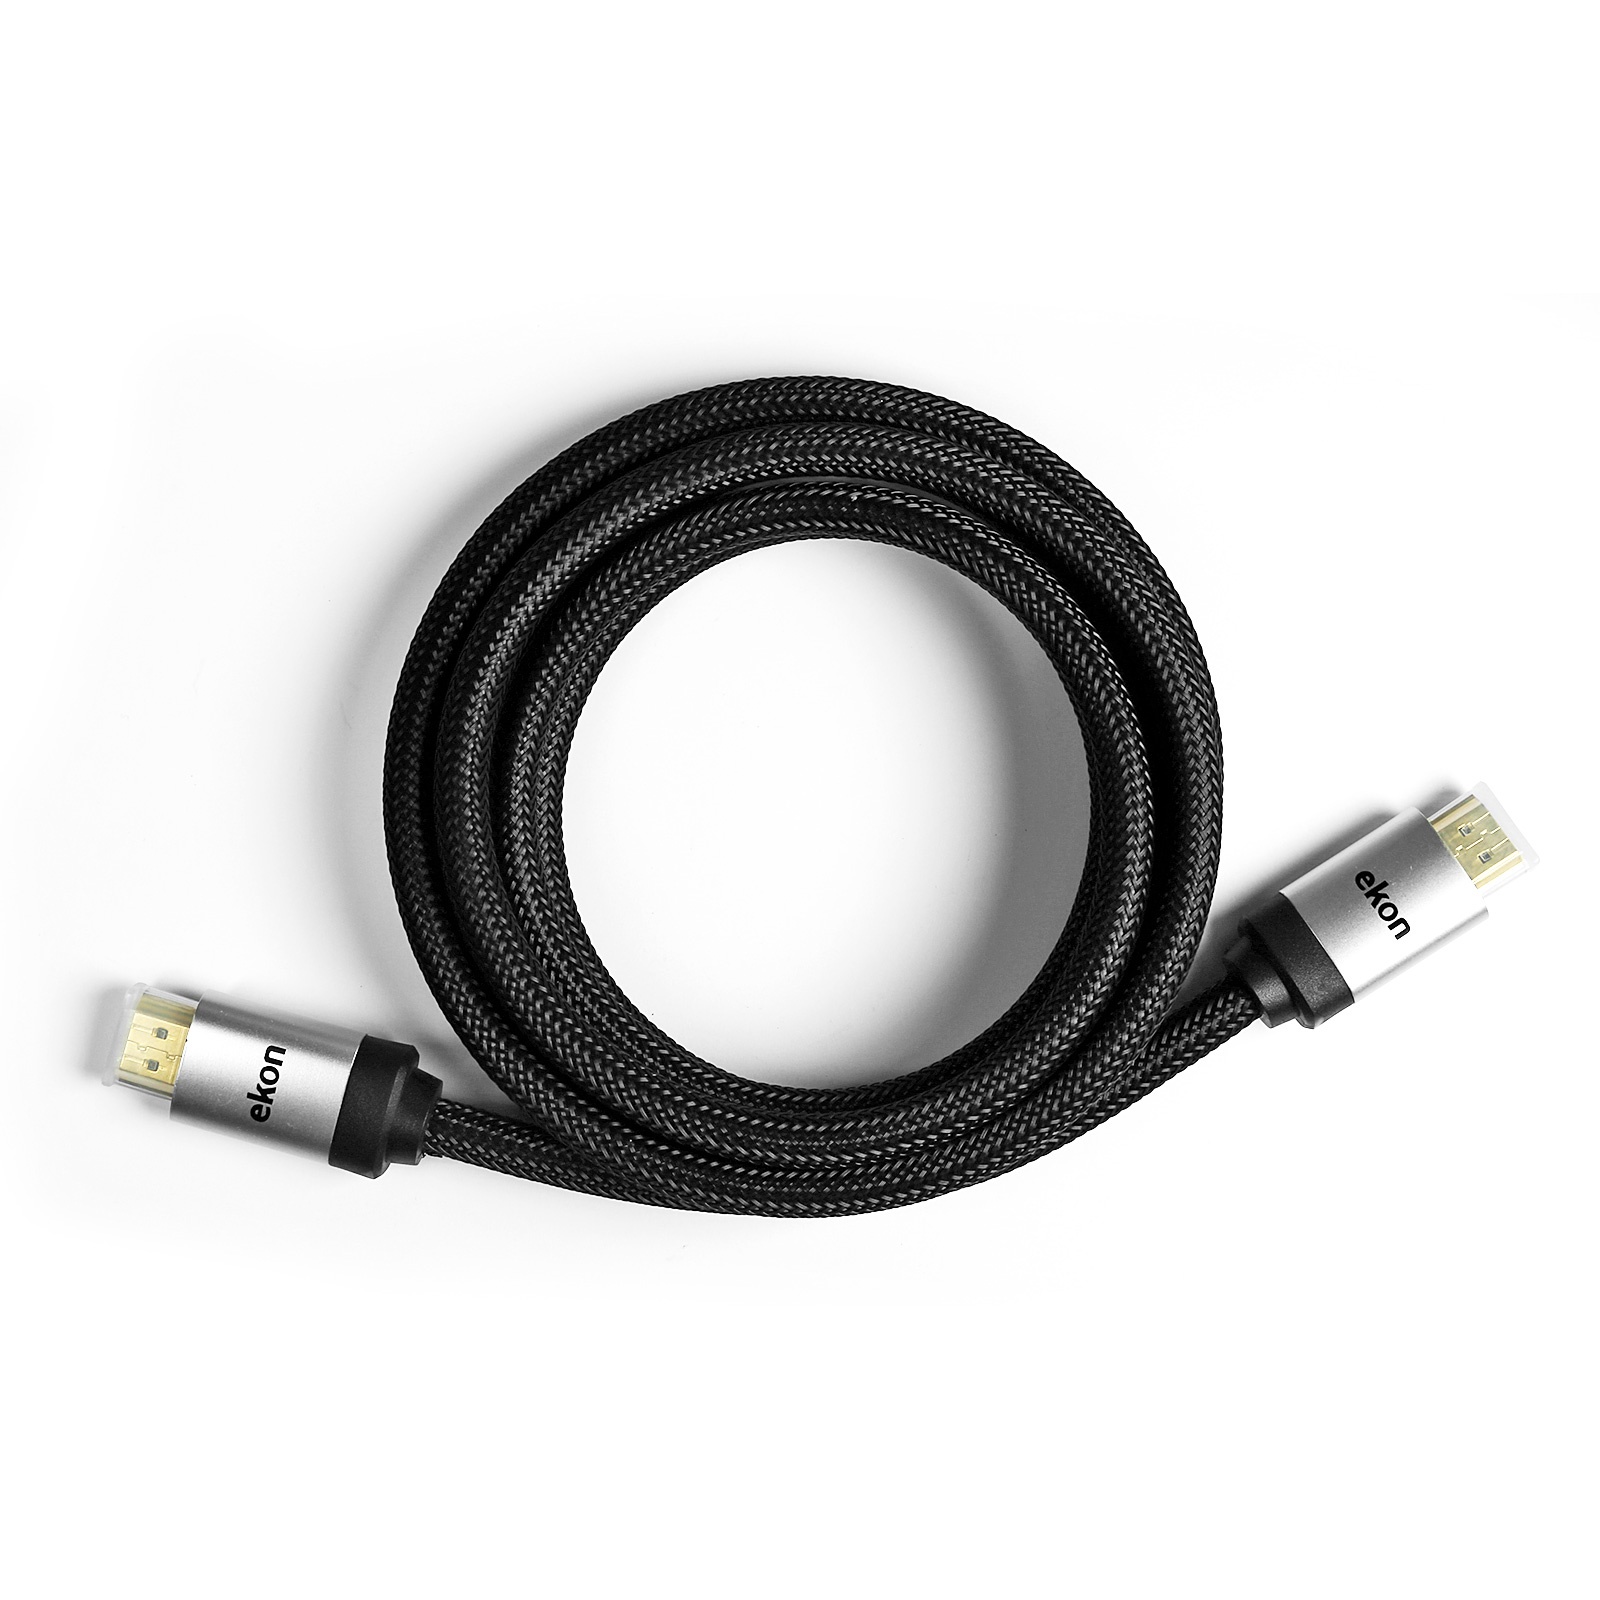 EKON HDMI V 1.4 cable male to micro HDMI male high speed with ethernet. OD 4.5mm.  Conductor pure copper,32 AWG, jacket black color. Connector PVC black  color and gold plated. Shielding: Al-foil with al-mg braid ( Double shielding). Total Lenght 1,8  mt